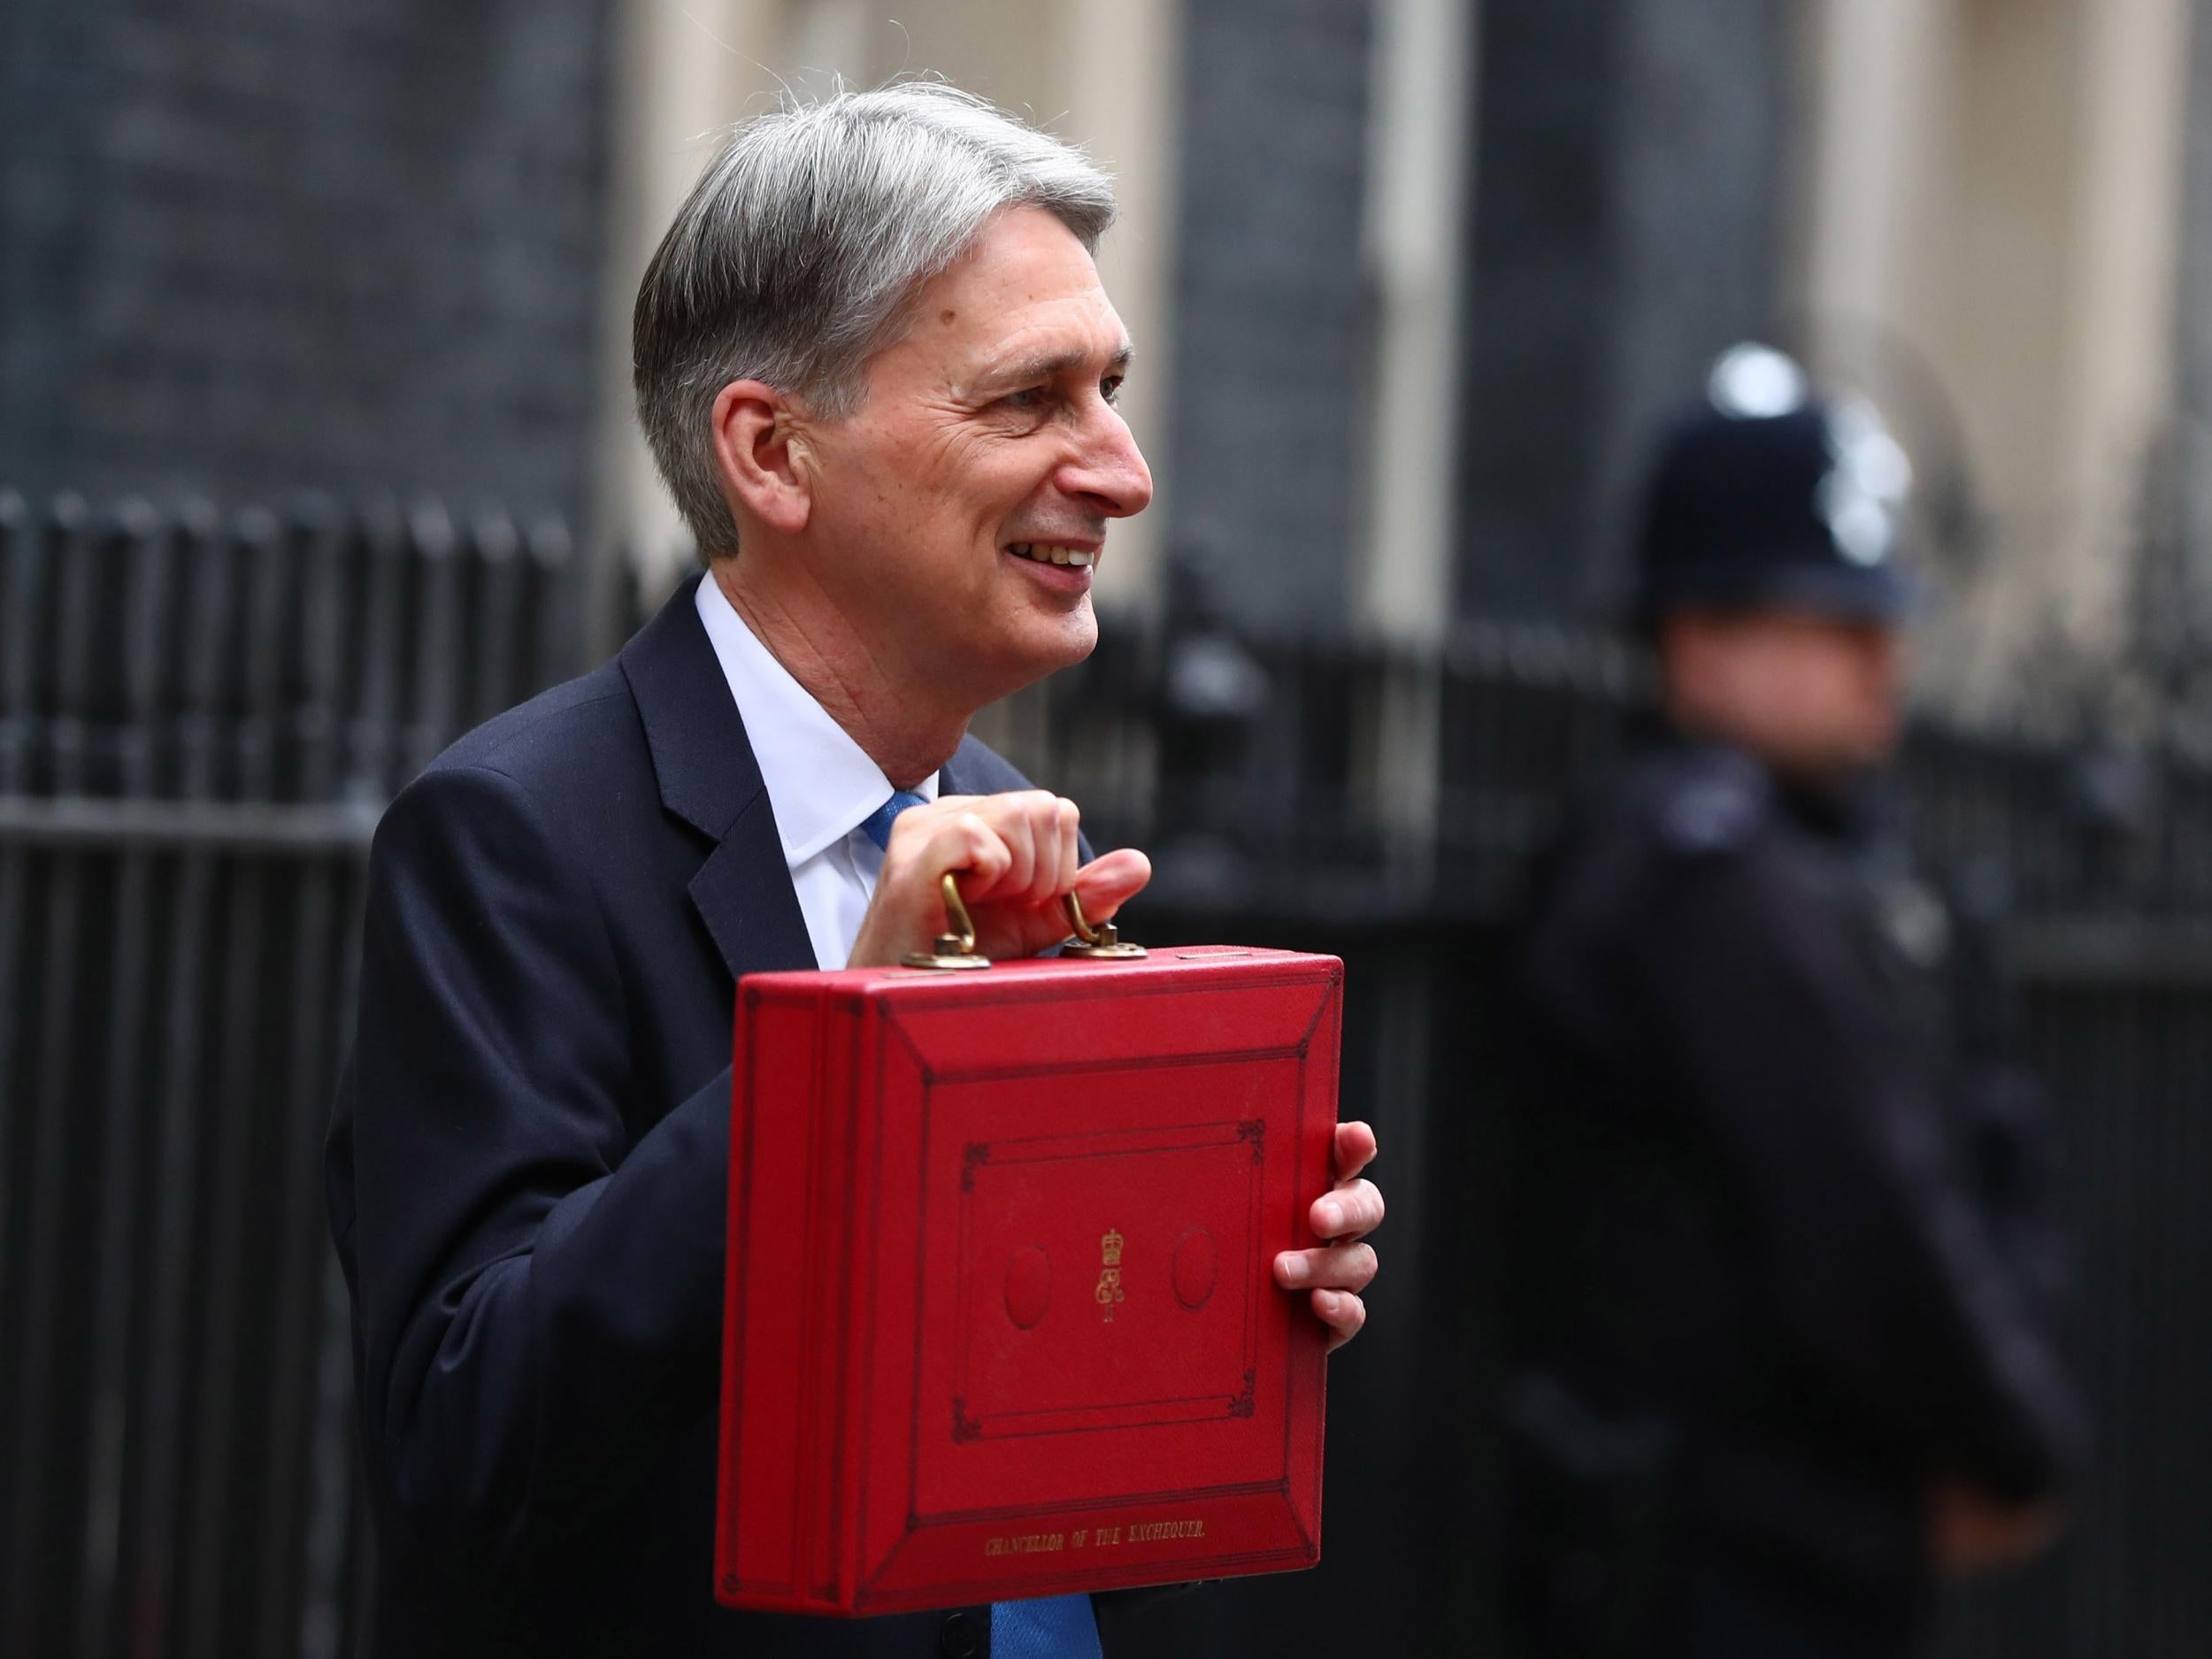 Britain's Chancellor of the Exchequer Phillip Hammond poses with the budget box at 11 Downing Street